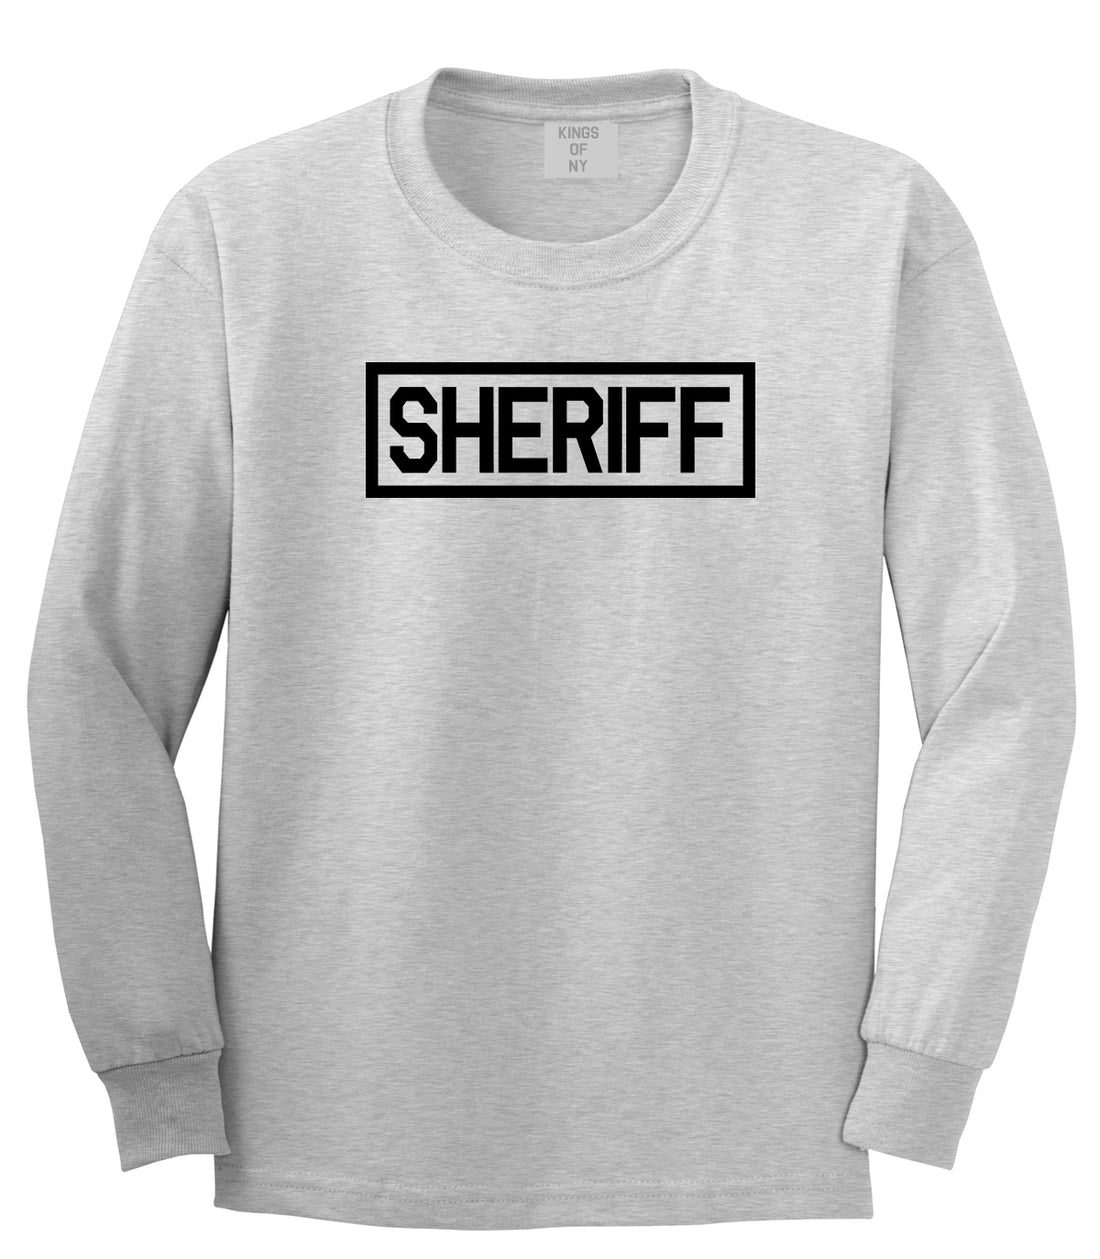 Sheriff County Police Mens Grey Long Sleeve T-Shirt by Kings Of NY